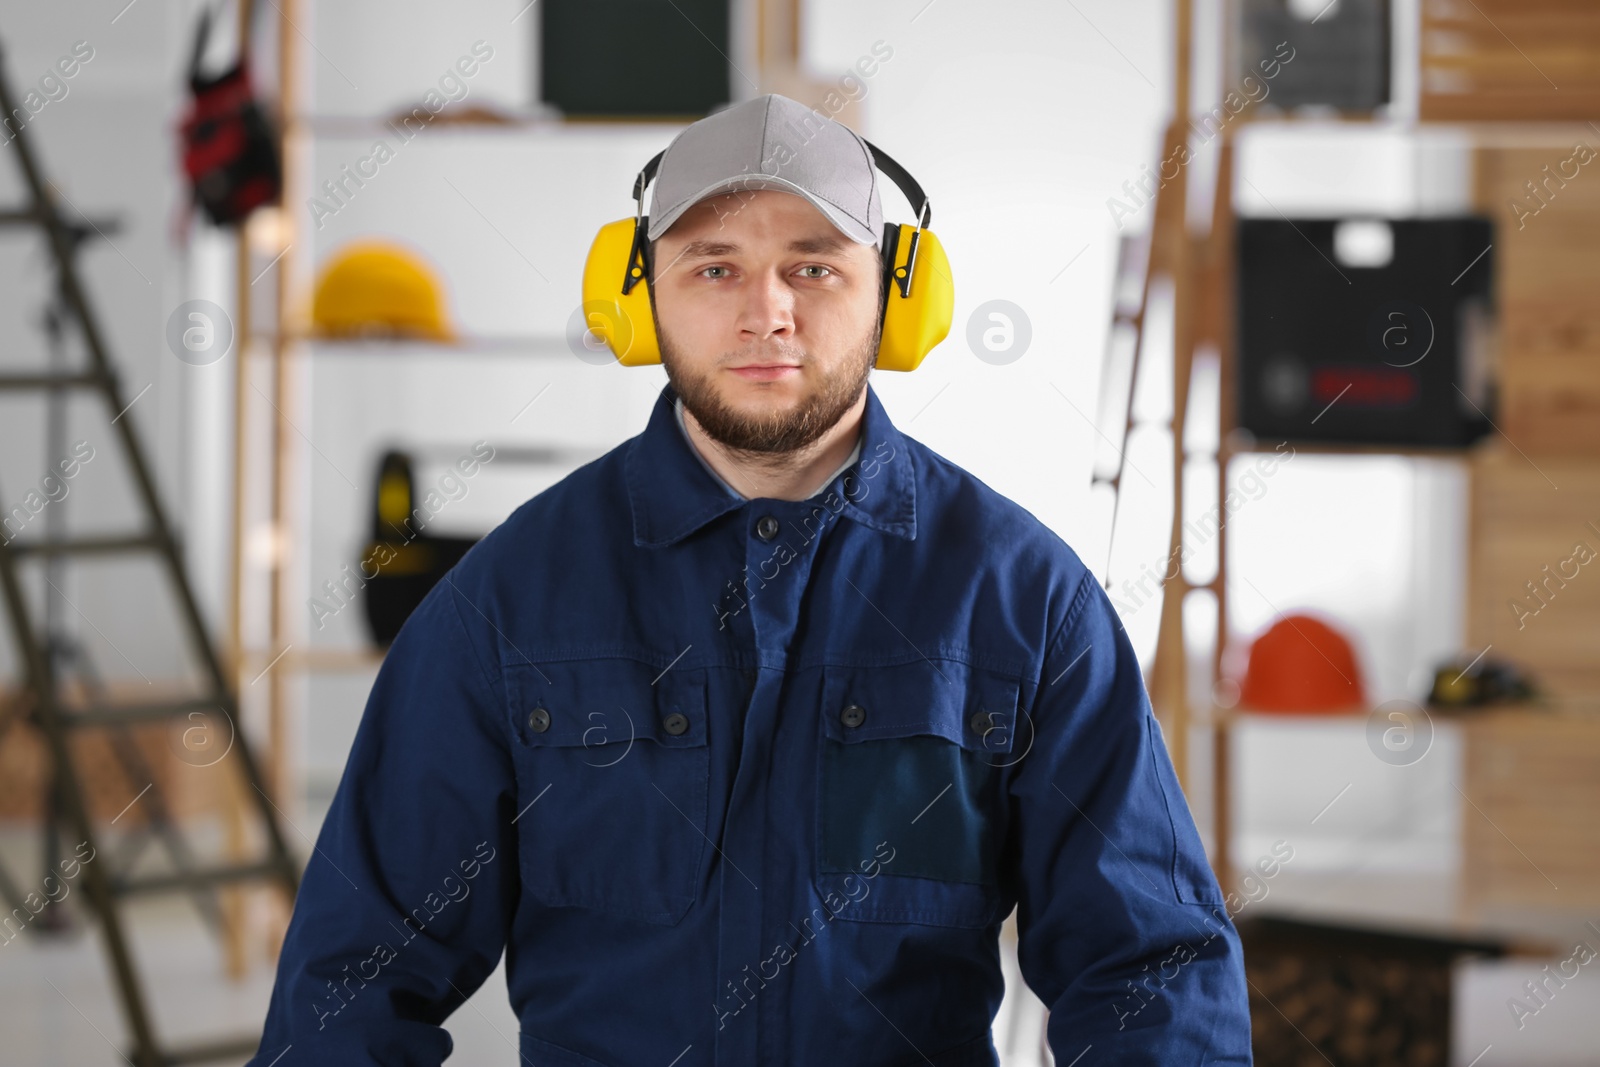 Photo of Worker wearing safety headphones indoors. Hearing protection device